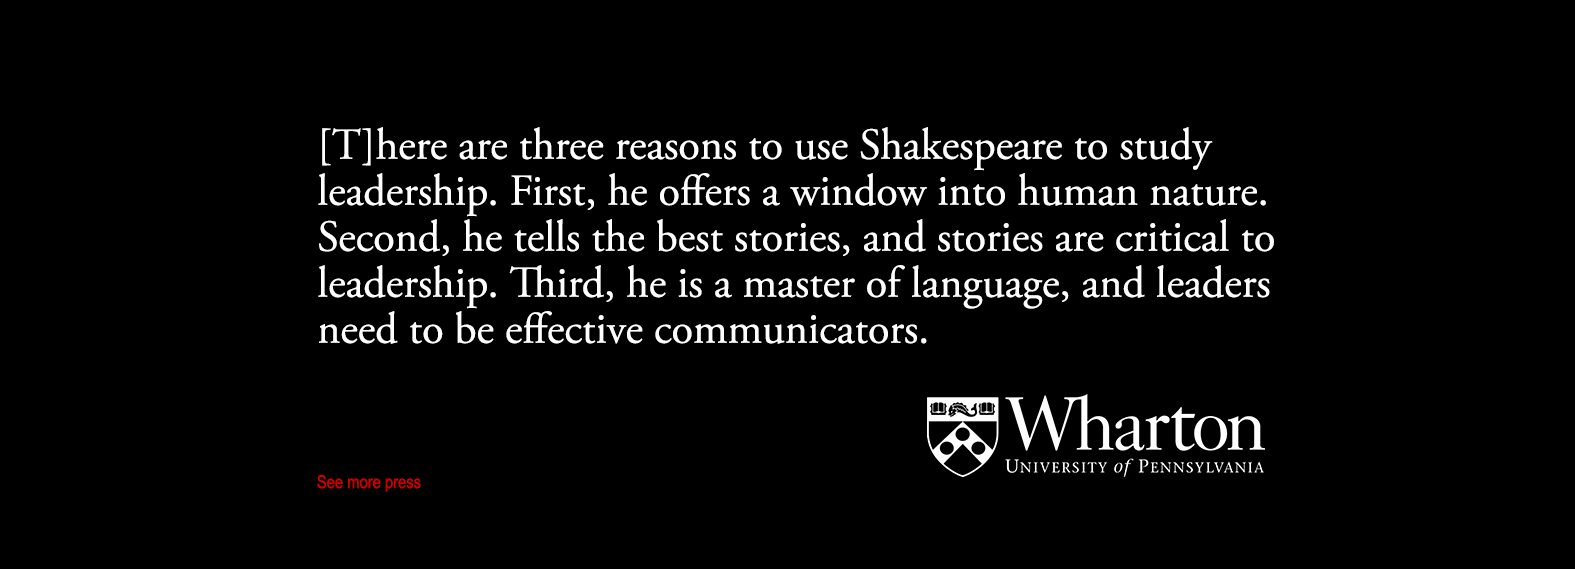 Movers and Shakespeares review wharton business school.png